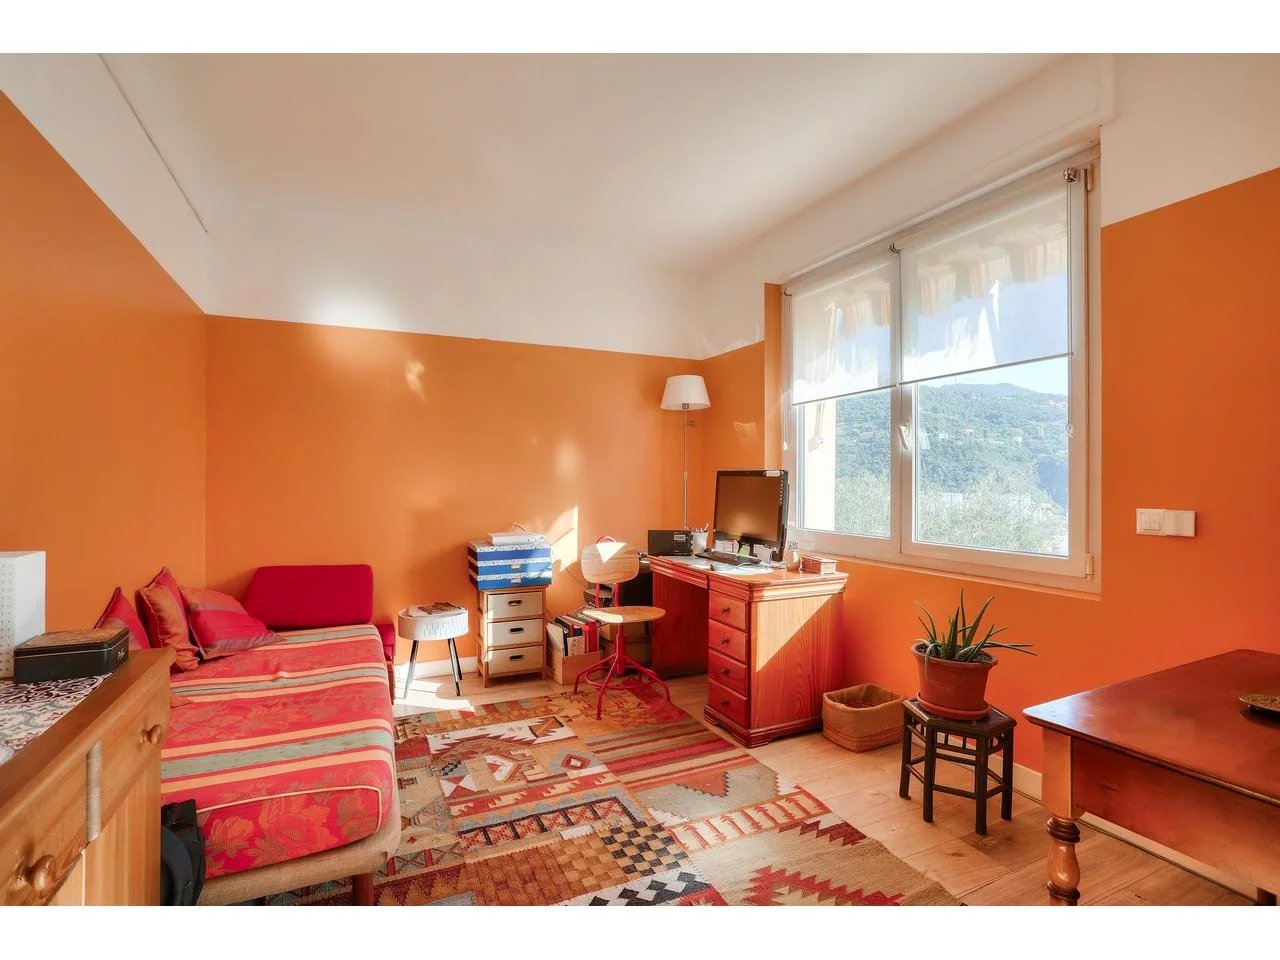 Appartement  4 Rooms 78m2  for sale   455 000 €